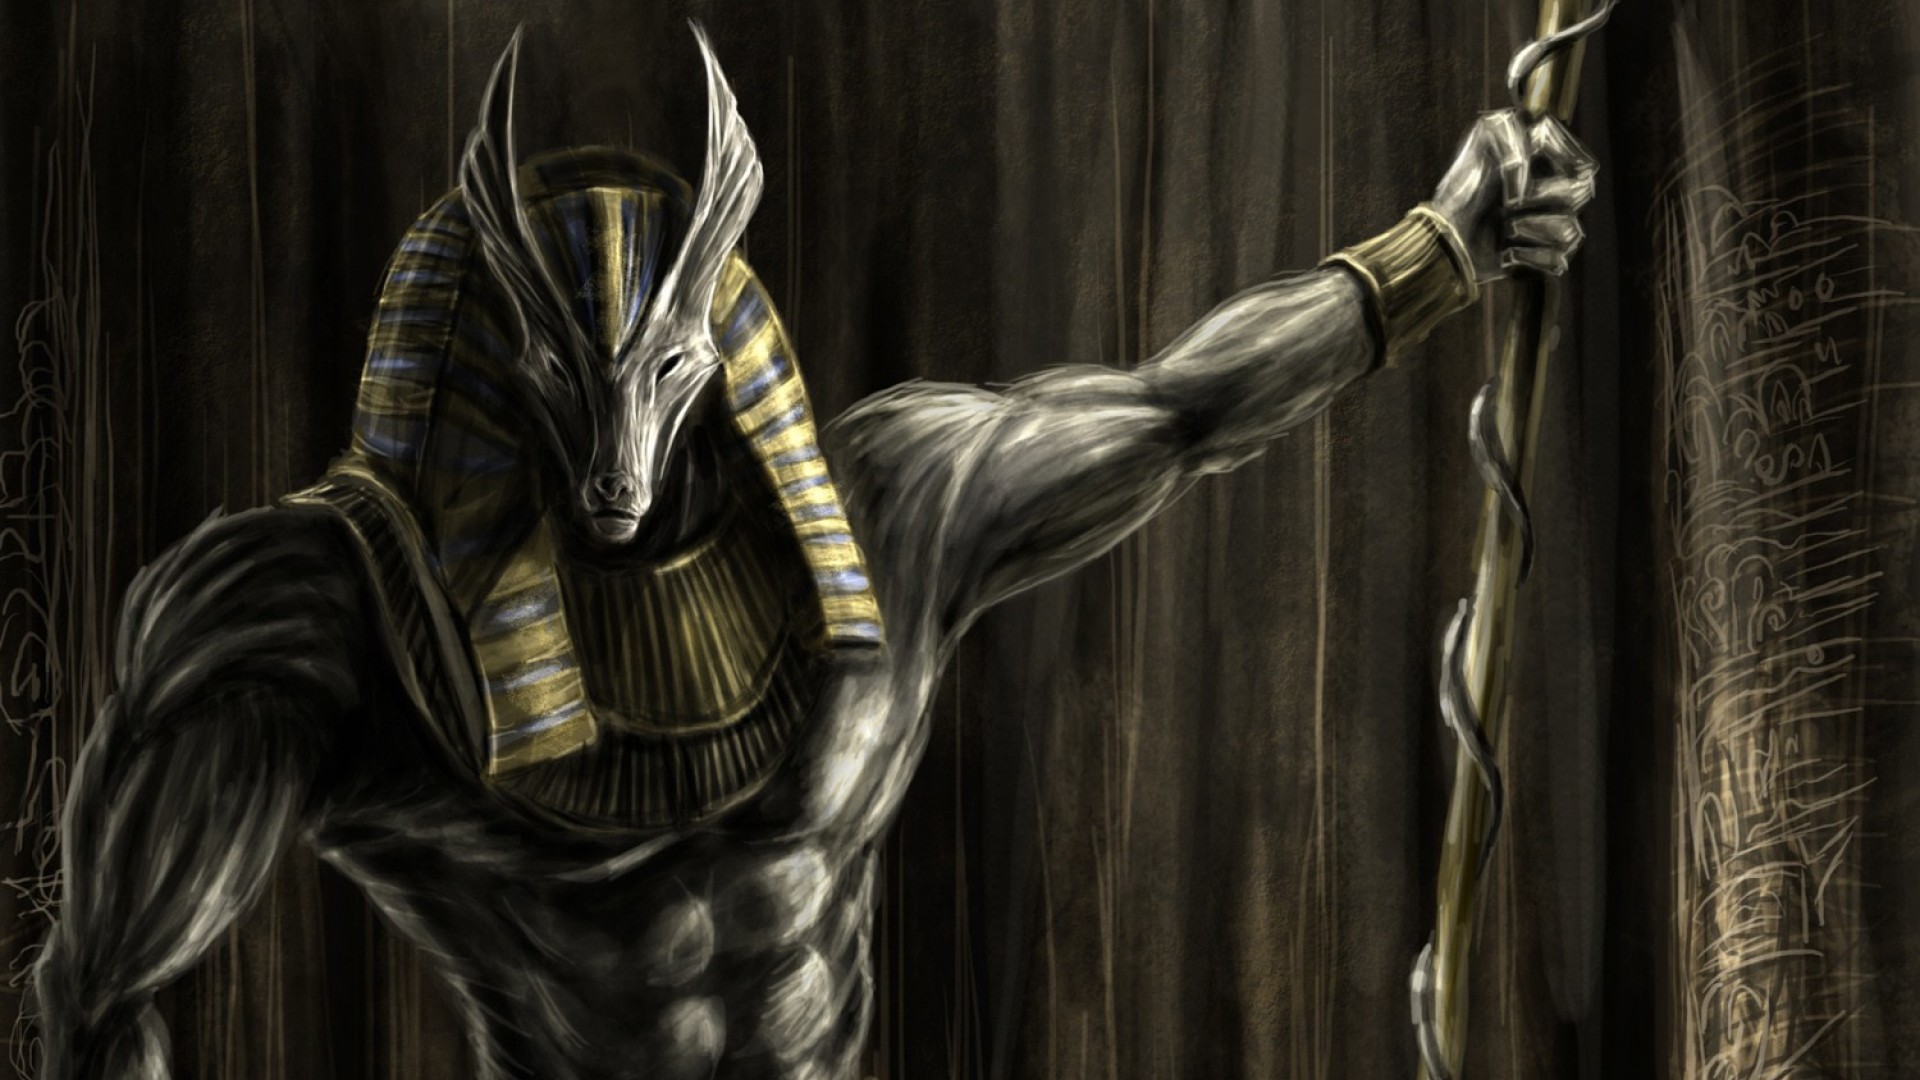 Define Anubis submited images